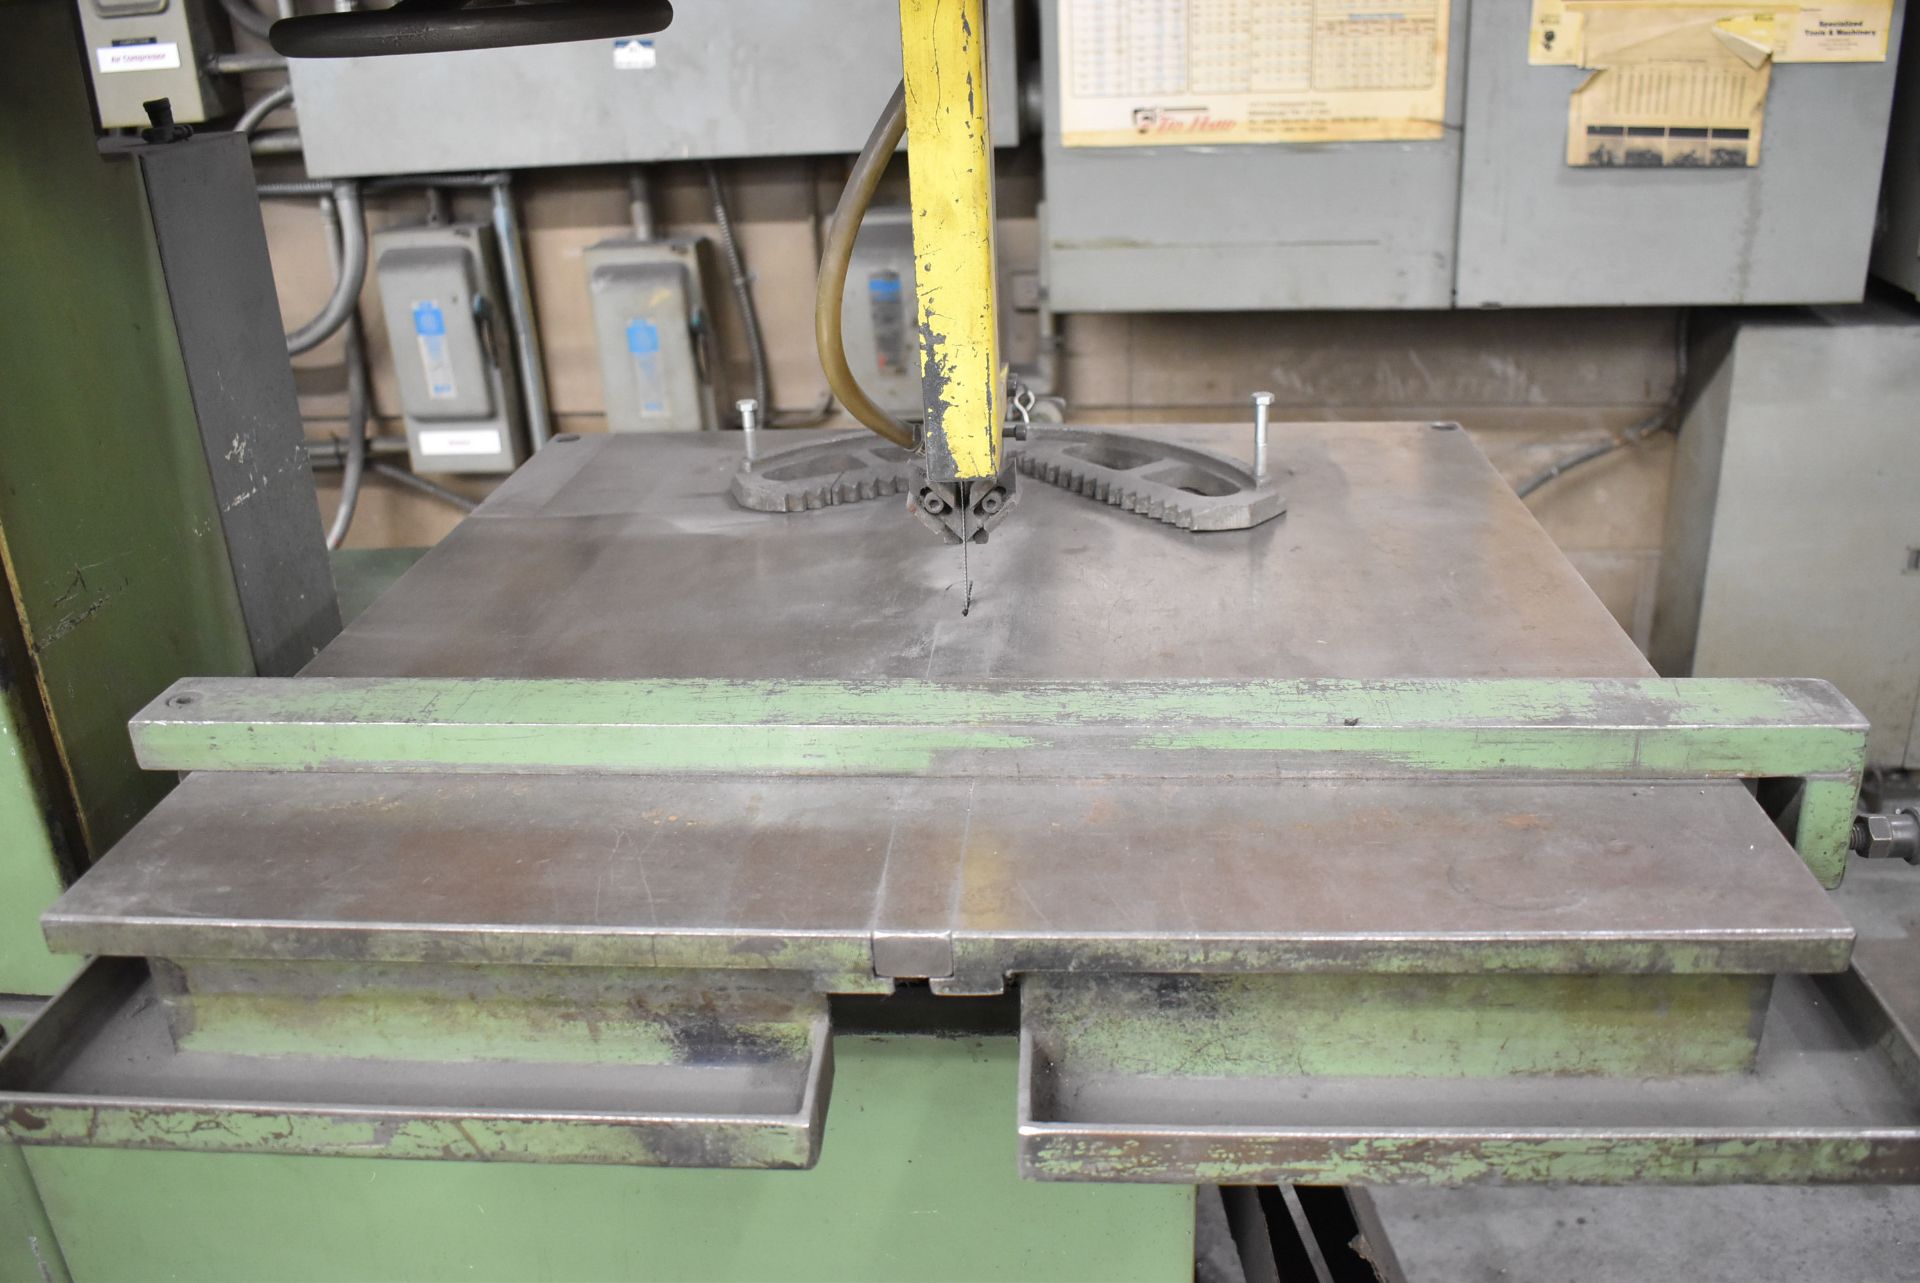 FRIGGI VERTICAL BAND SAW WITH 26"X26" TABLE, 20" THROAT, SPEEDS TO 948 M/MIN, 14" WORKPIECE - Image 2 of 9